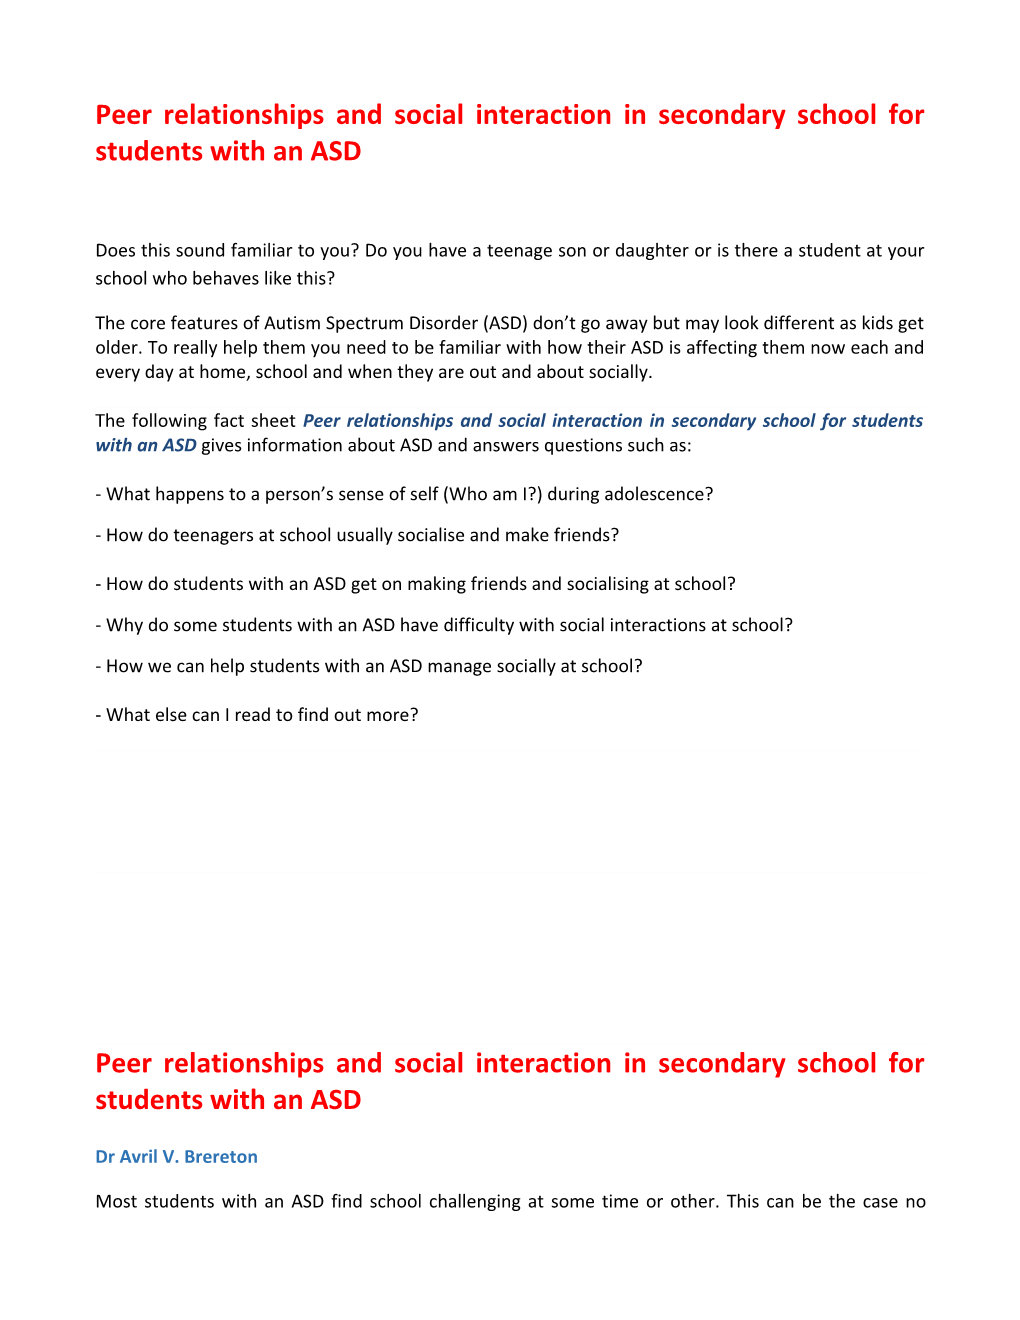 Peer Relationships and Social Interaction in Secondary School for Students with an ASD